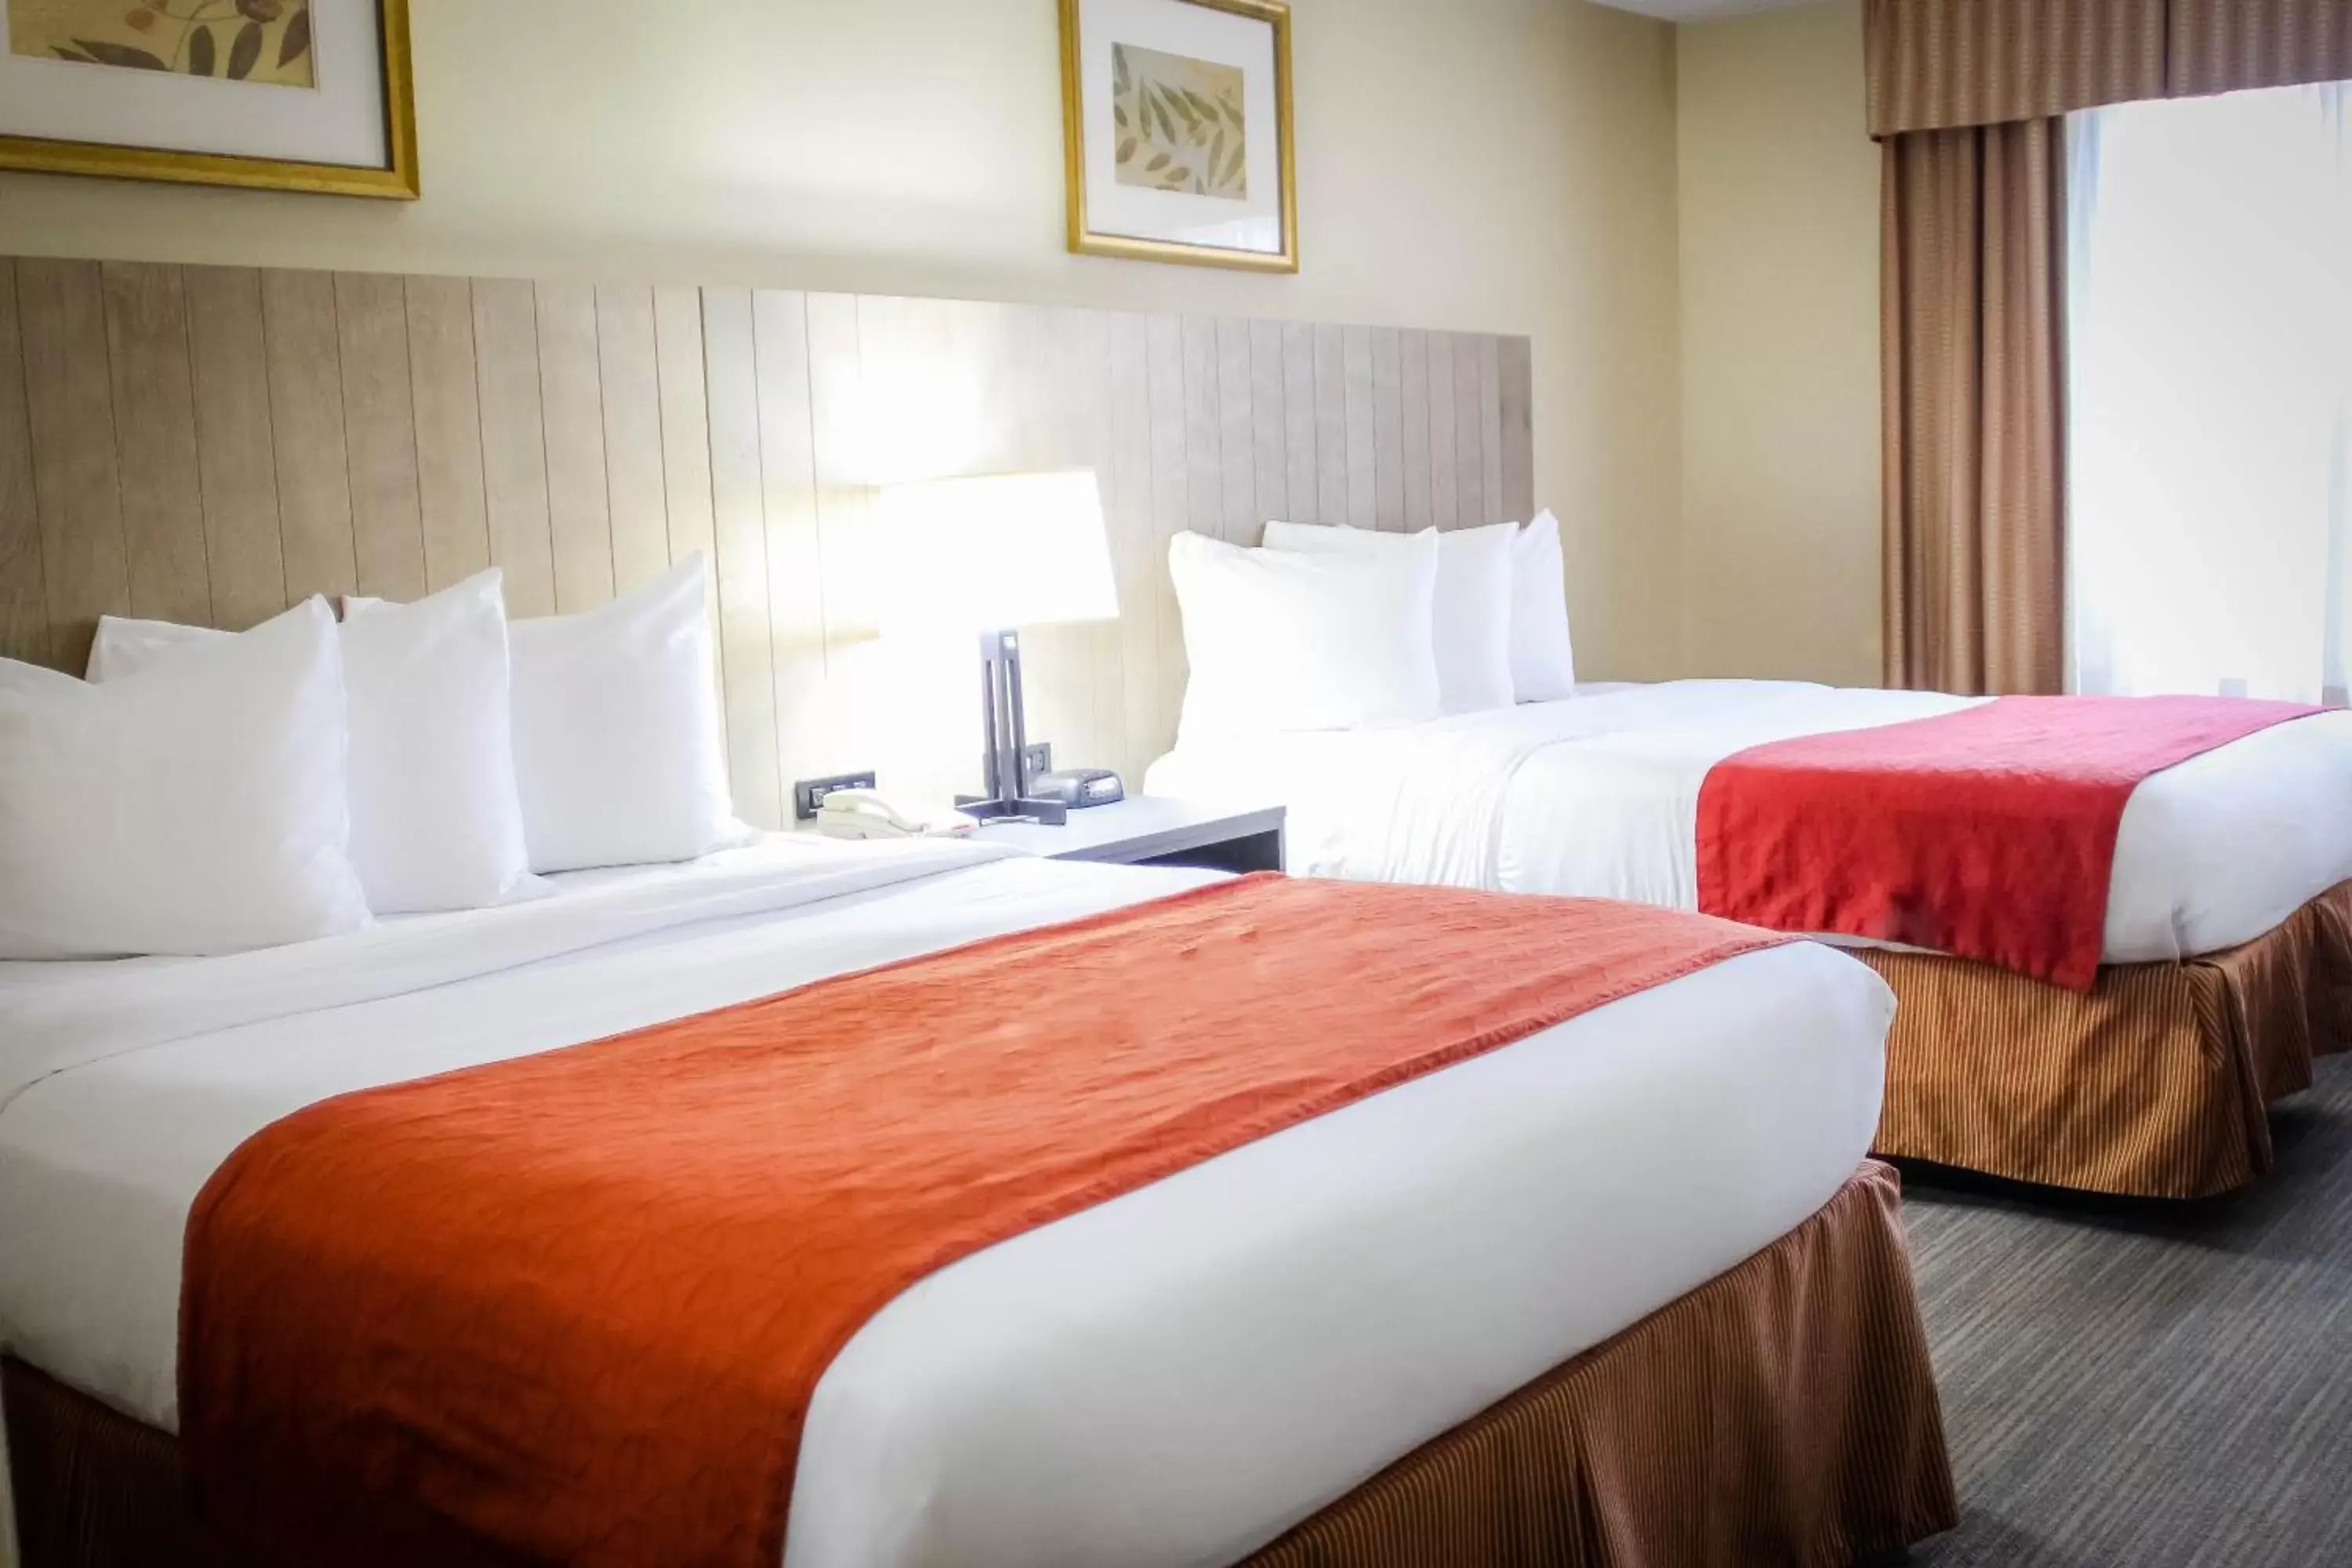 Bed in Country Inn & Suites by Radisson, Chester, VA